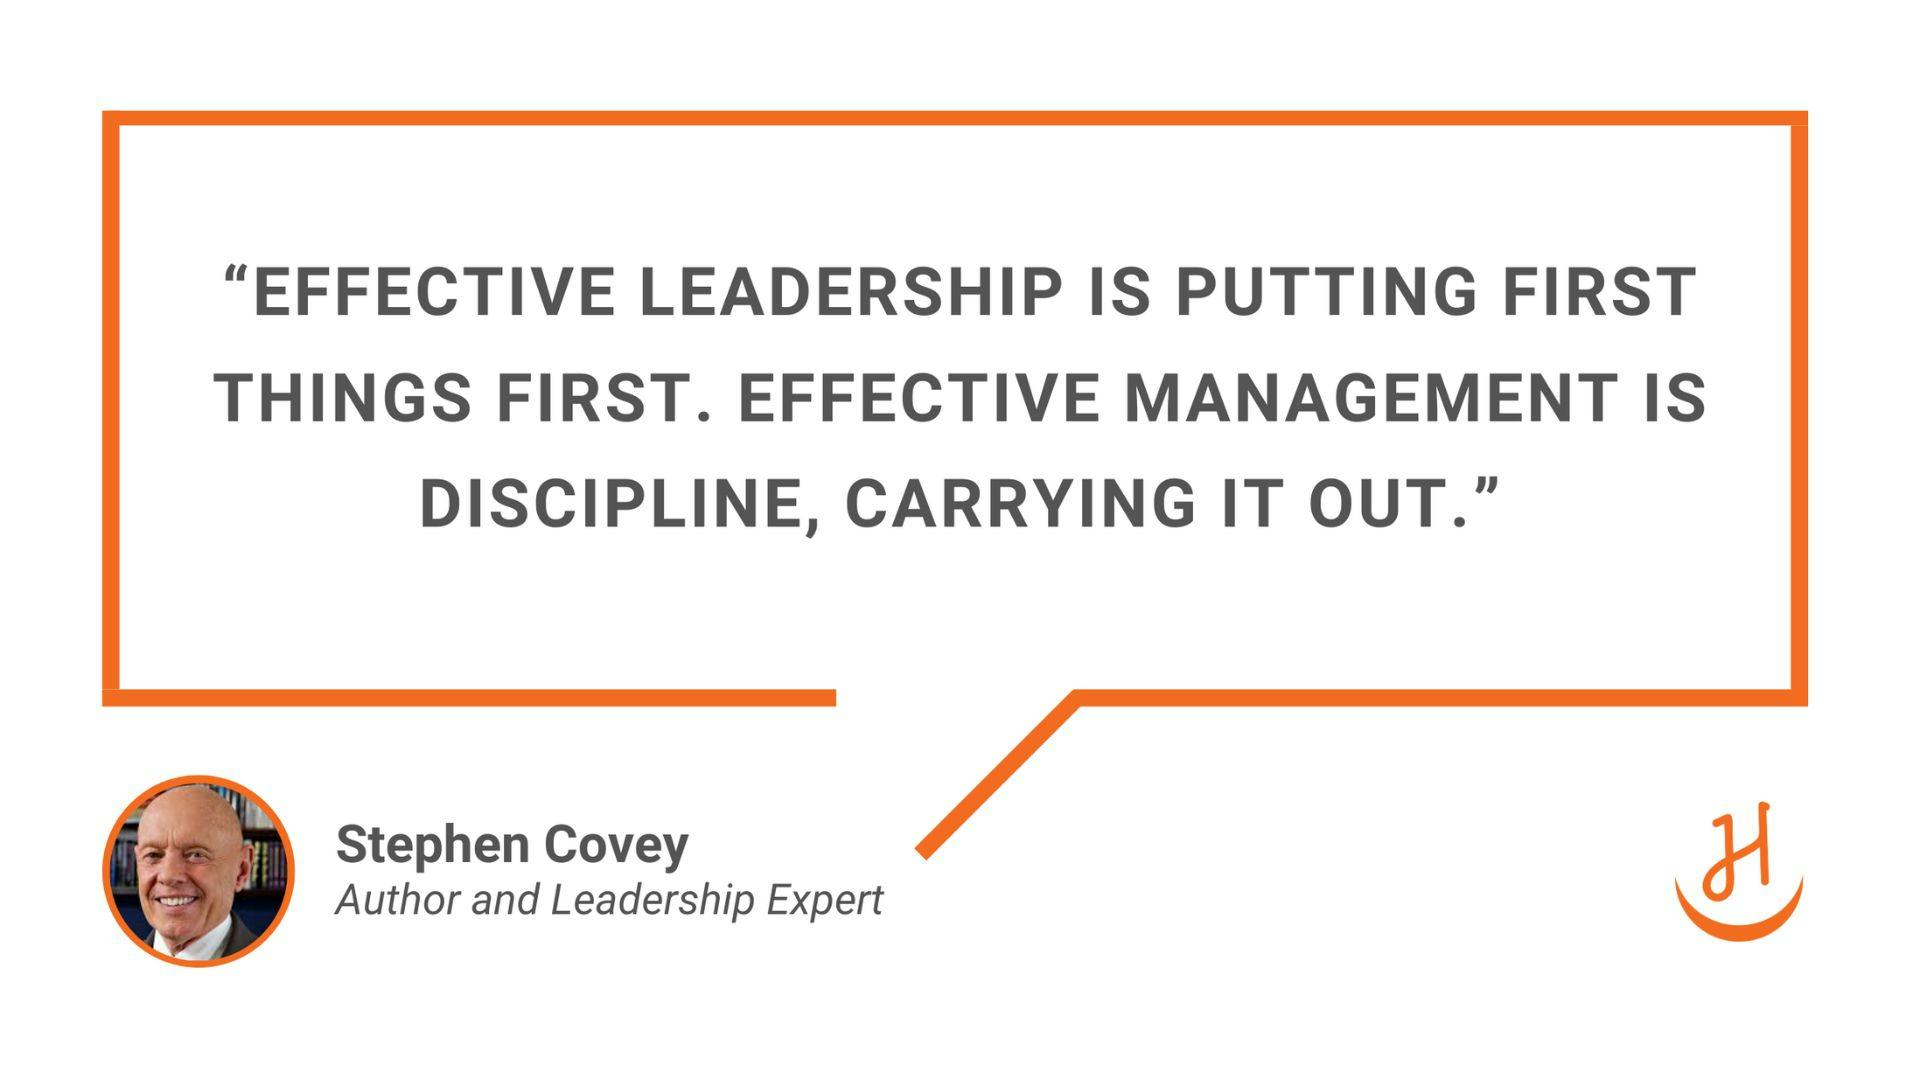 Effective leadership is putting first things first. Effective management is discipline, carrying it out. Quote by Stephen Covey, Author & Leadership Expert